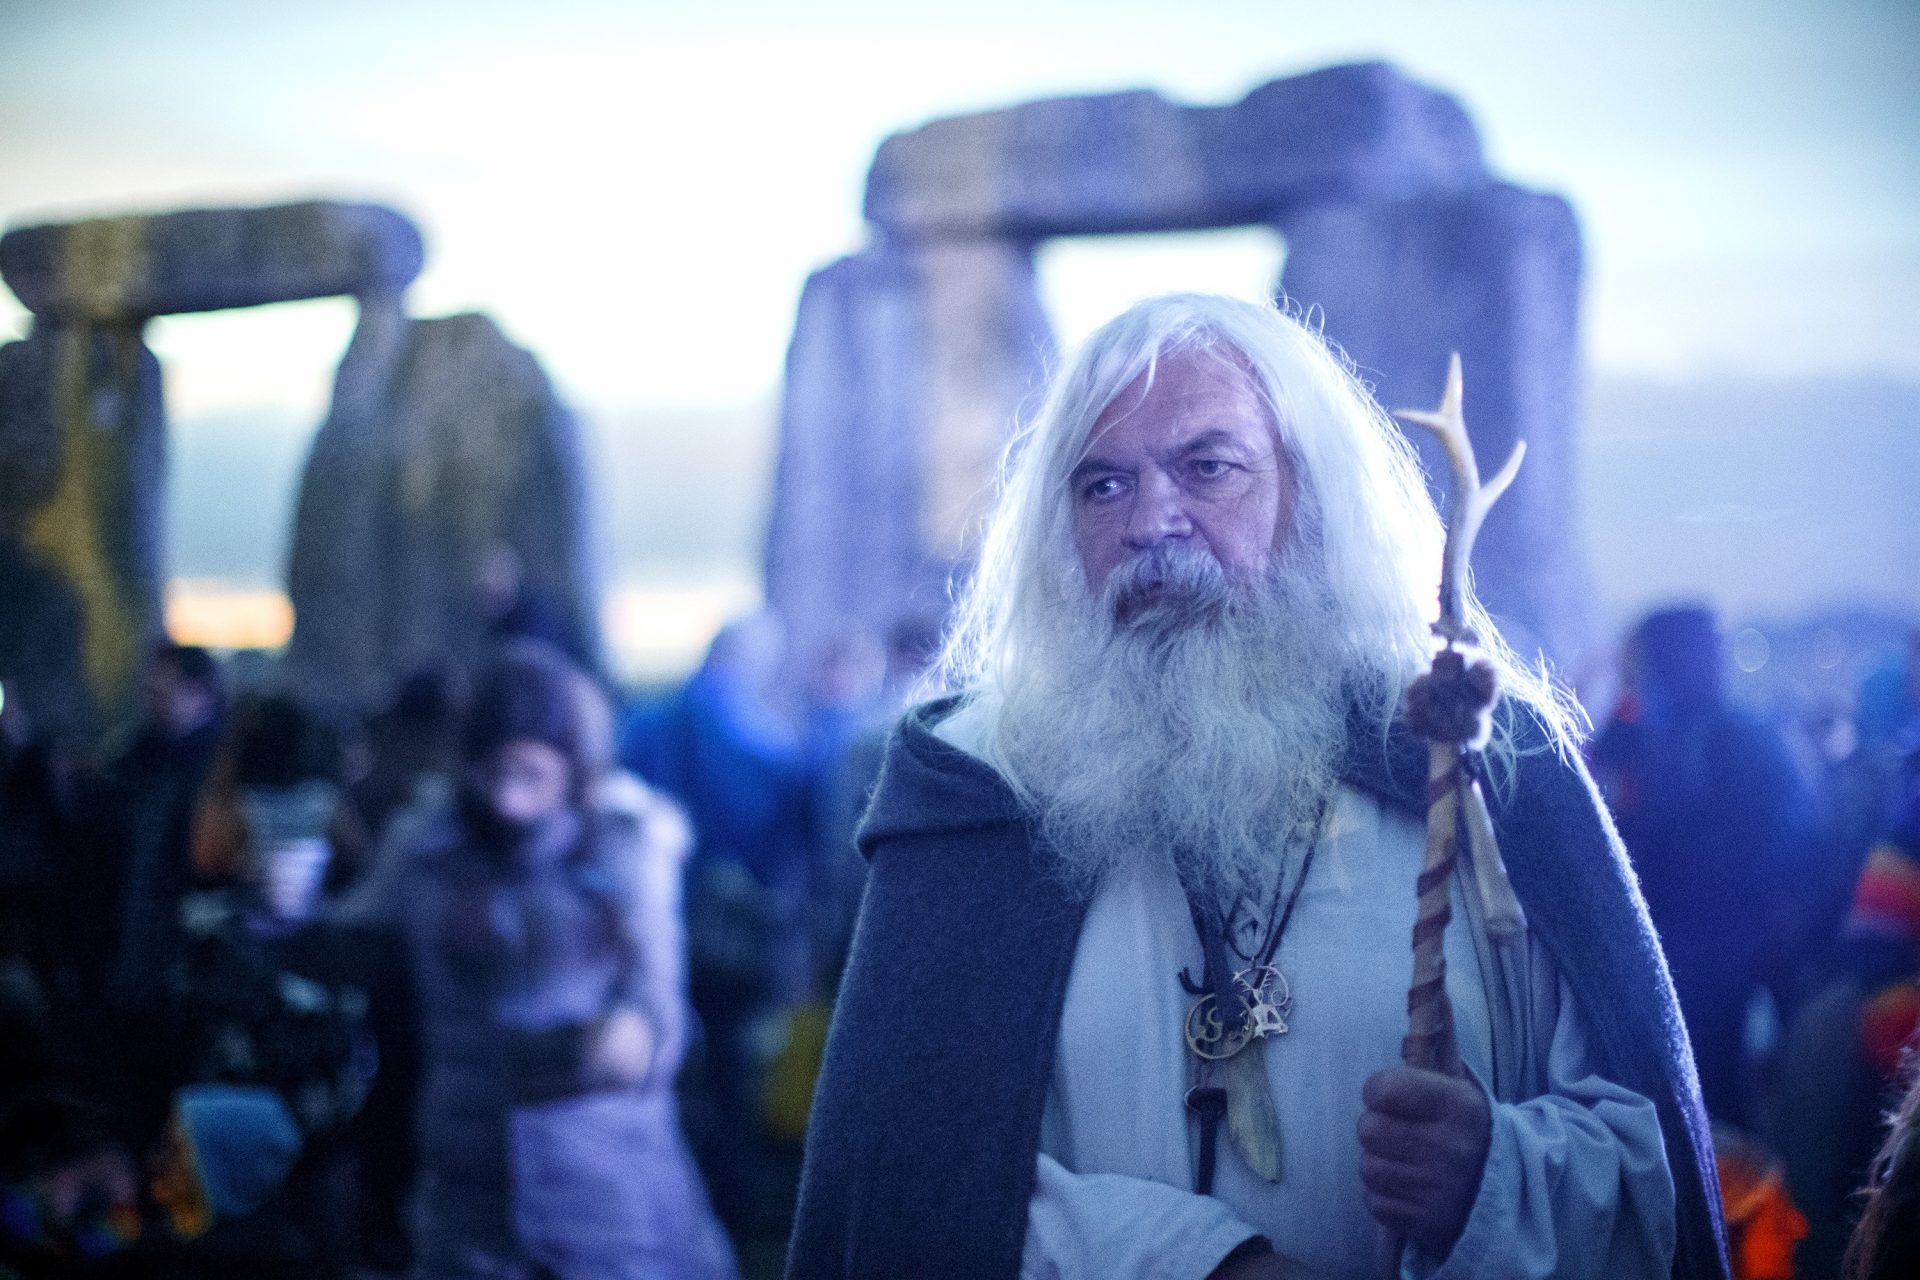 Meet the Druids: mysterious and dangerous religious leaders of the ancient Celts